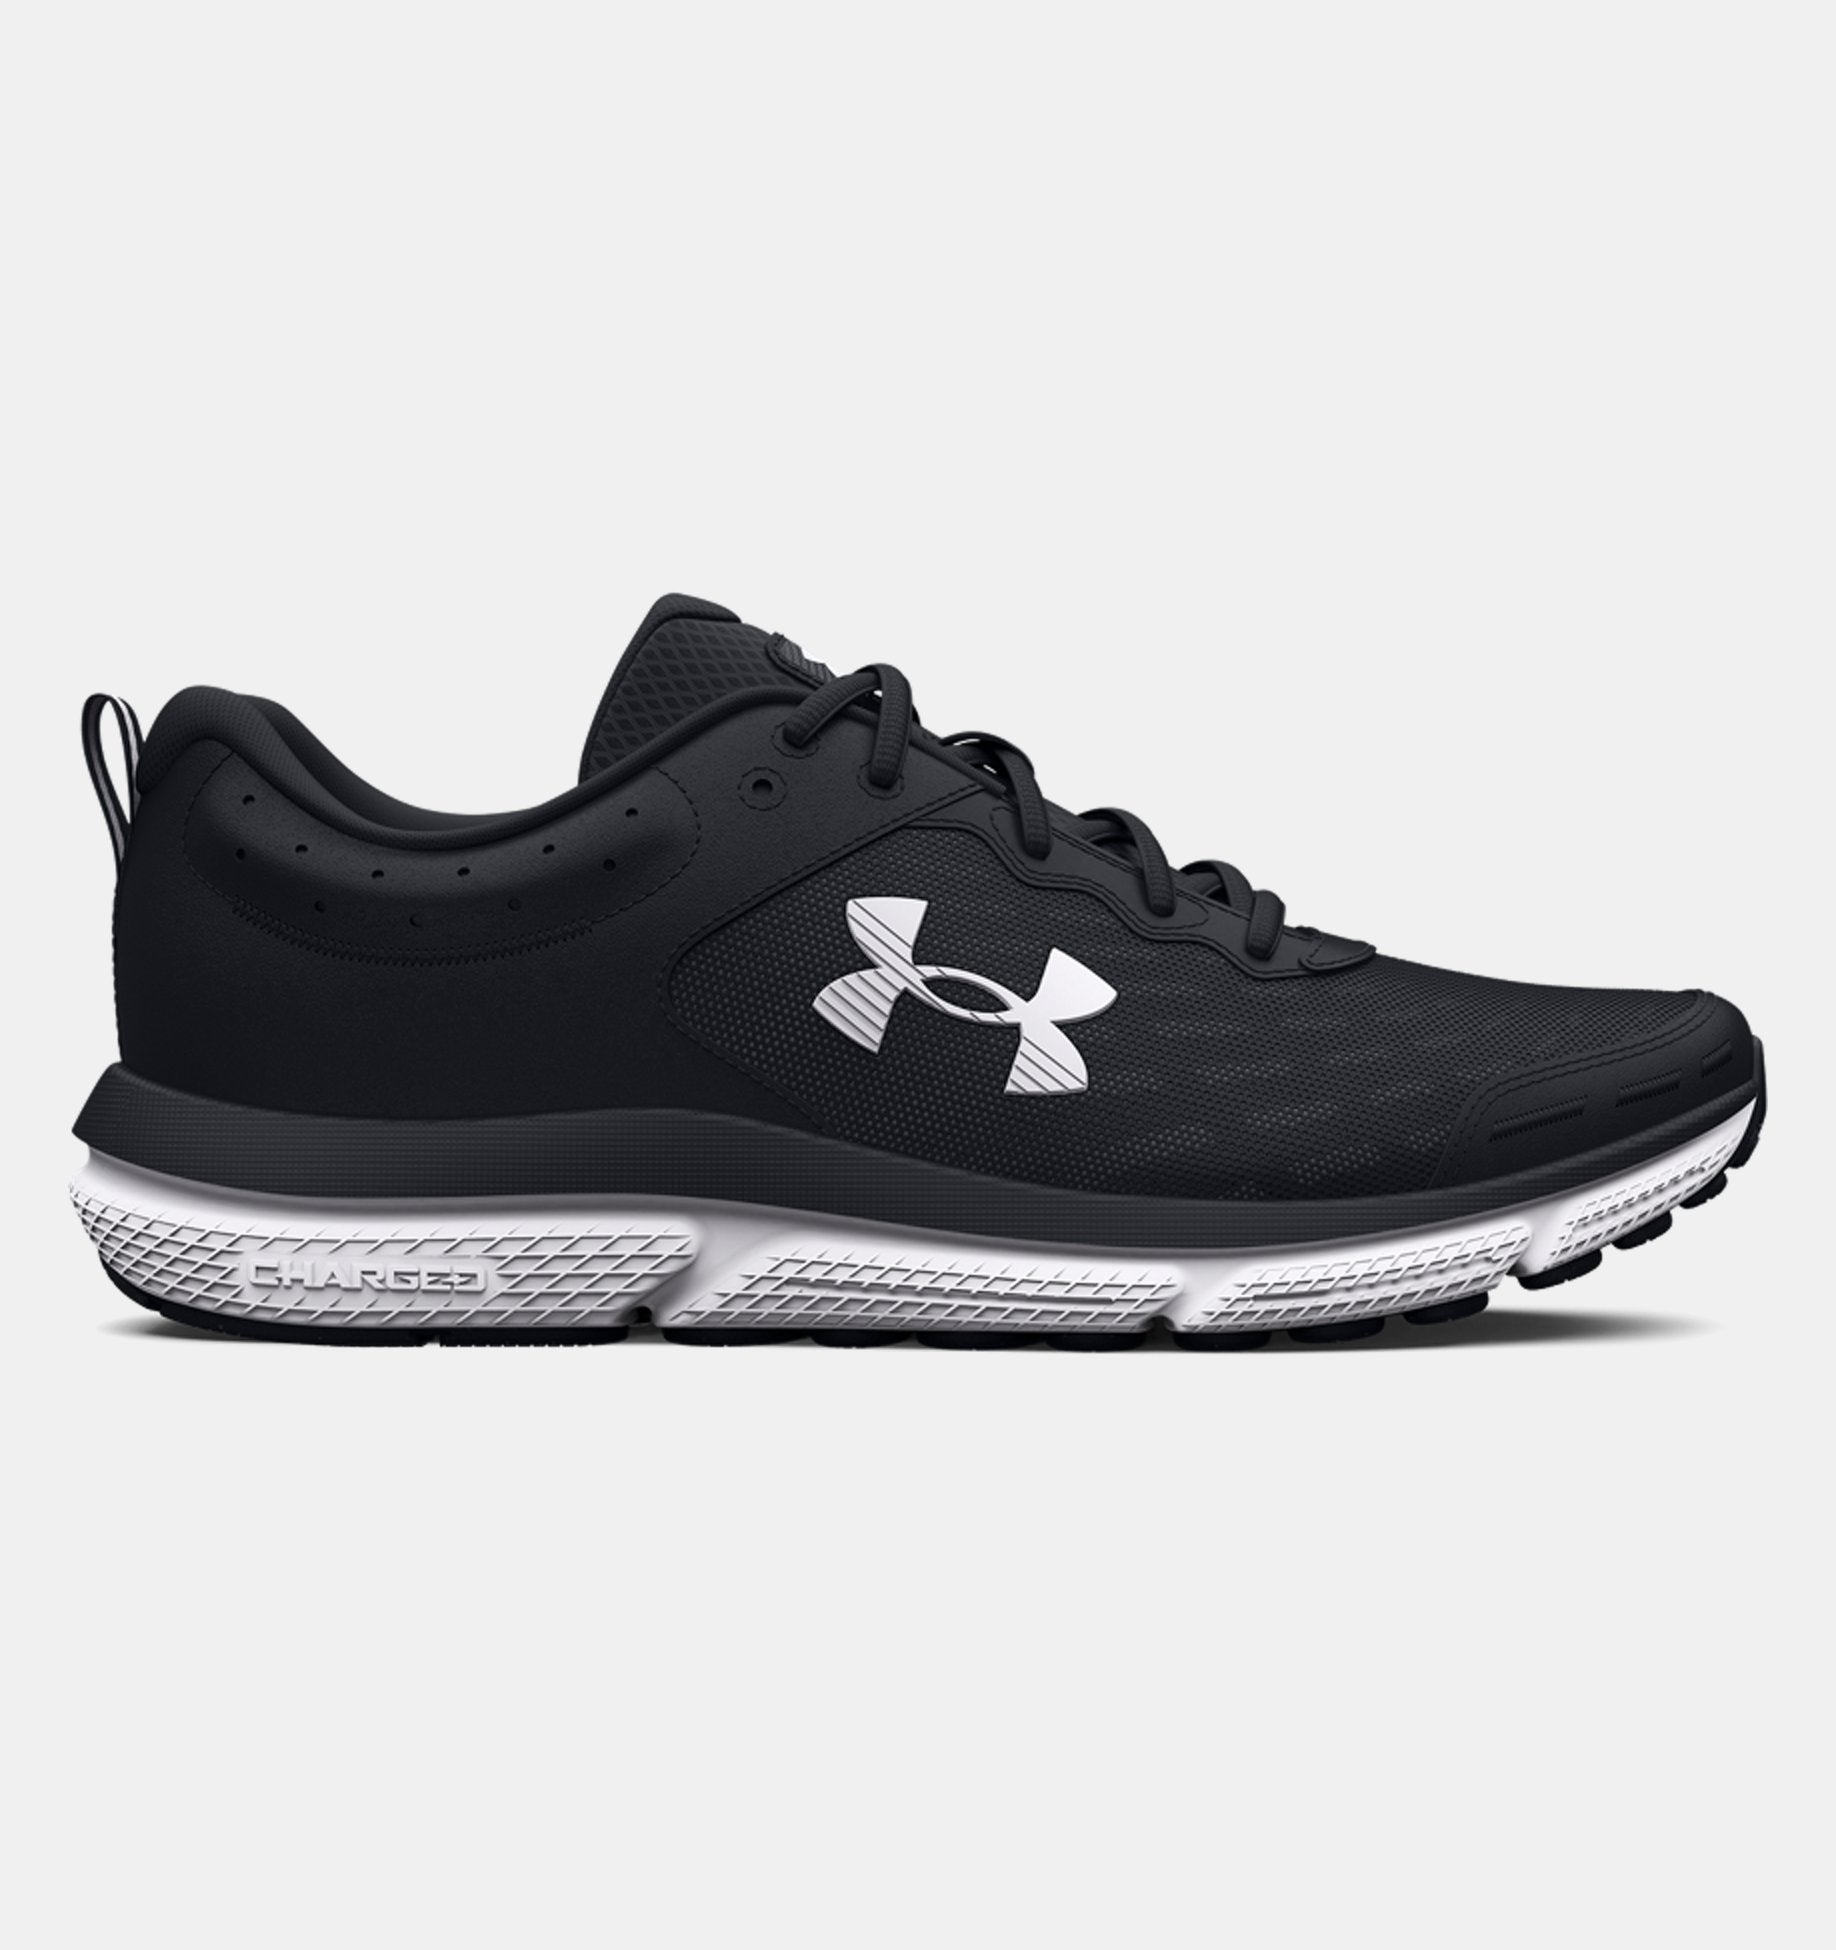 Under Armour Charged Assert 10 - Womens